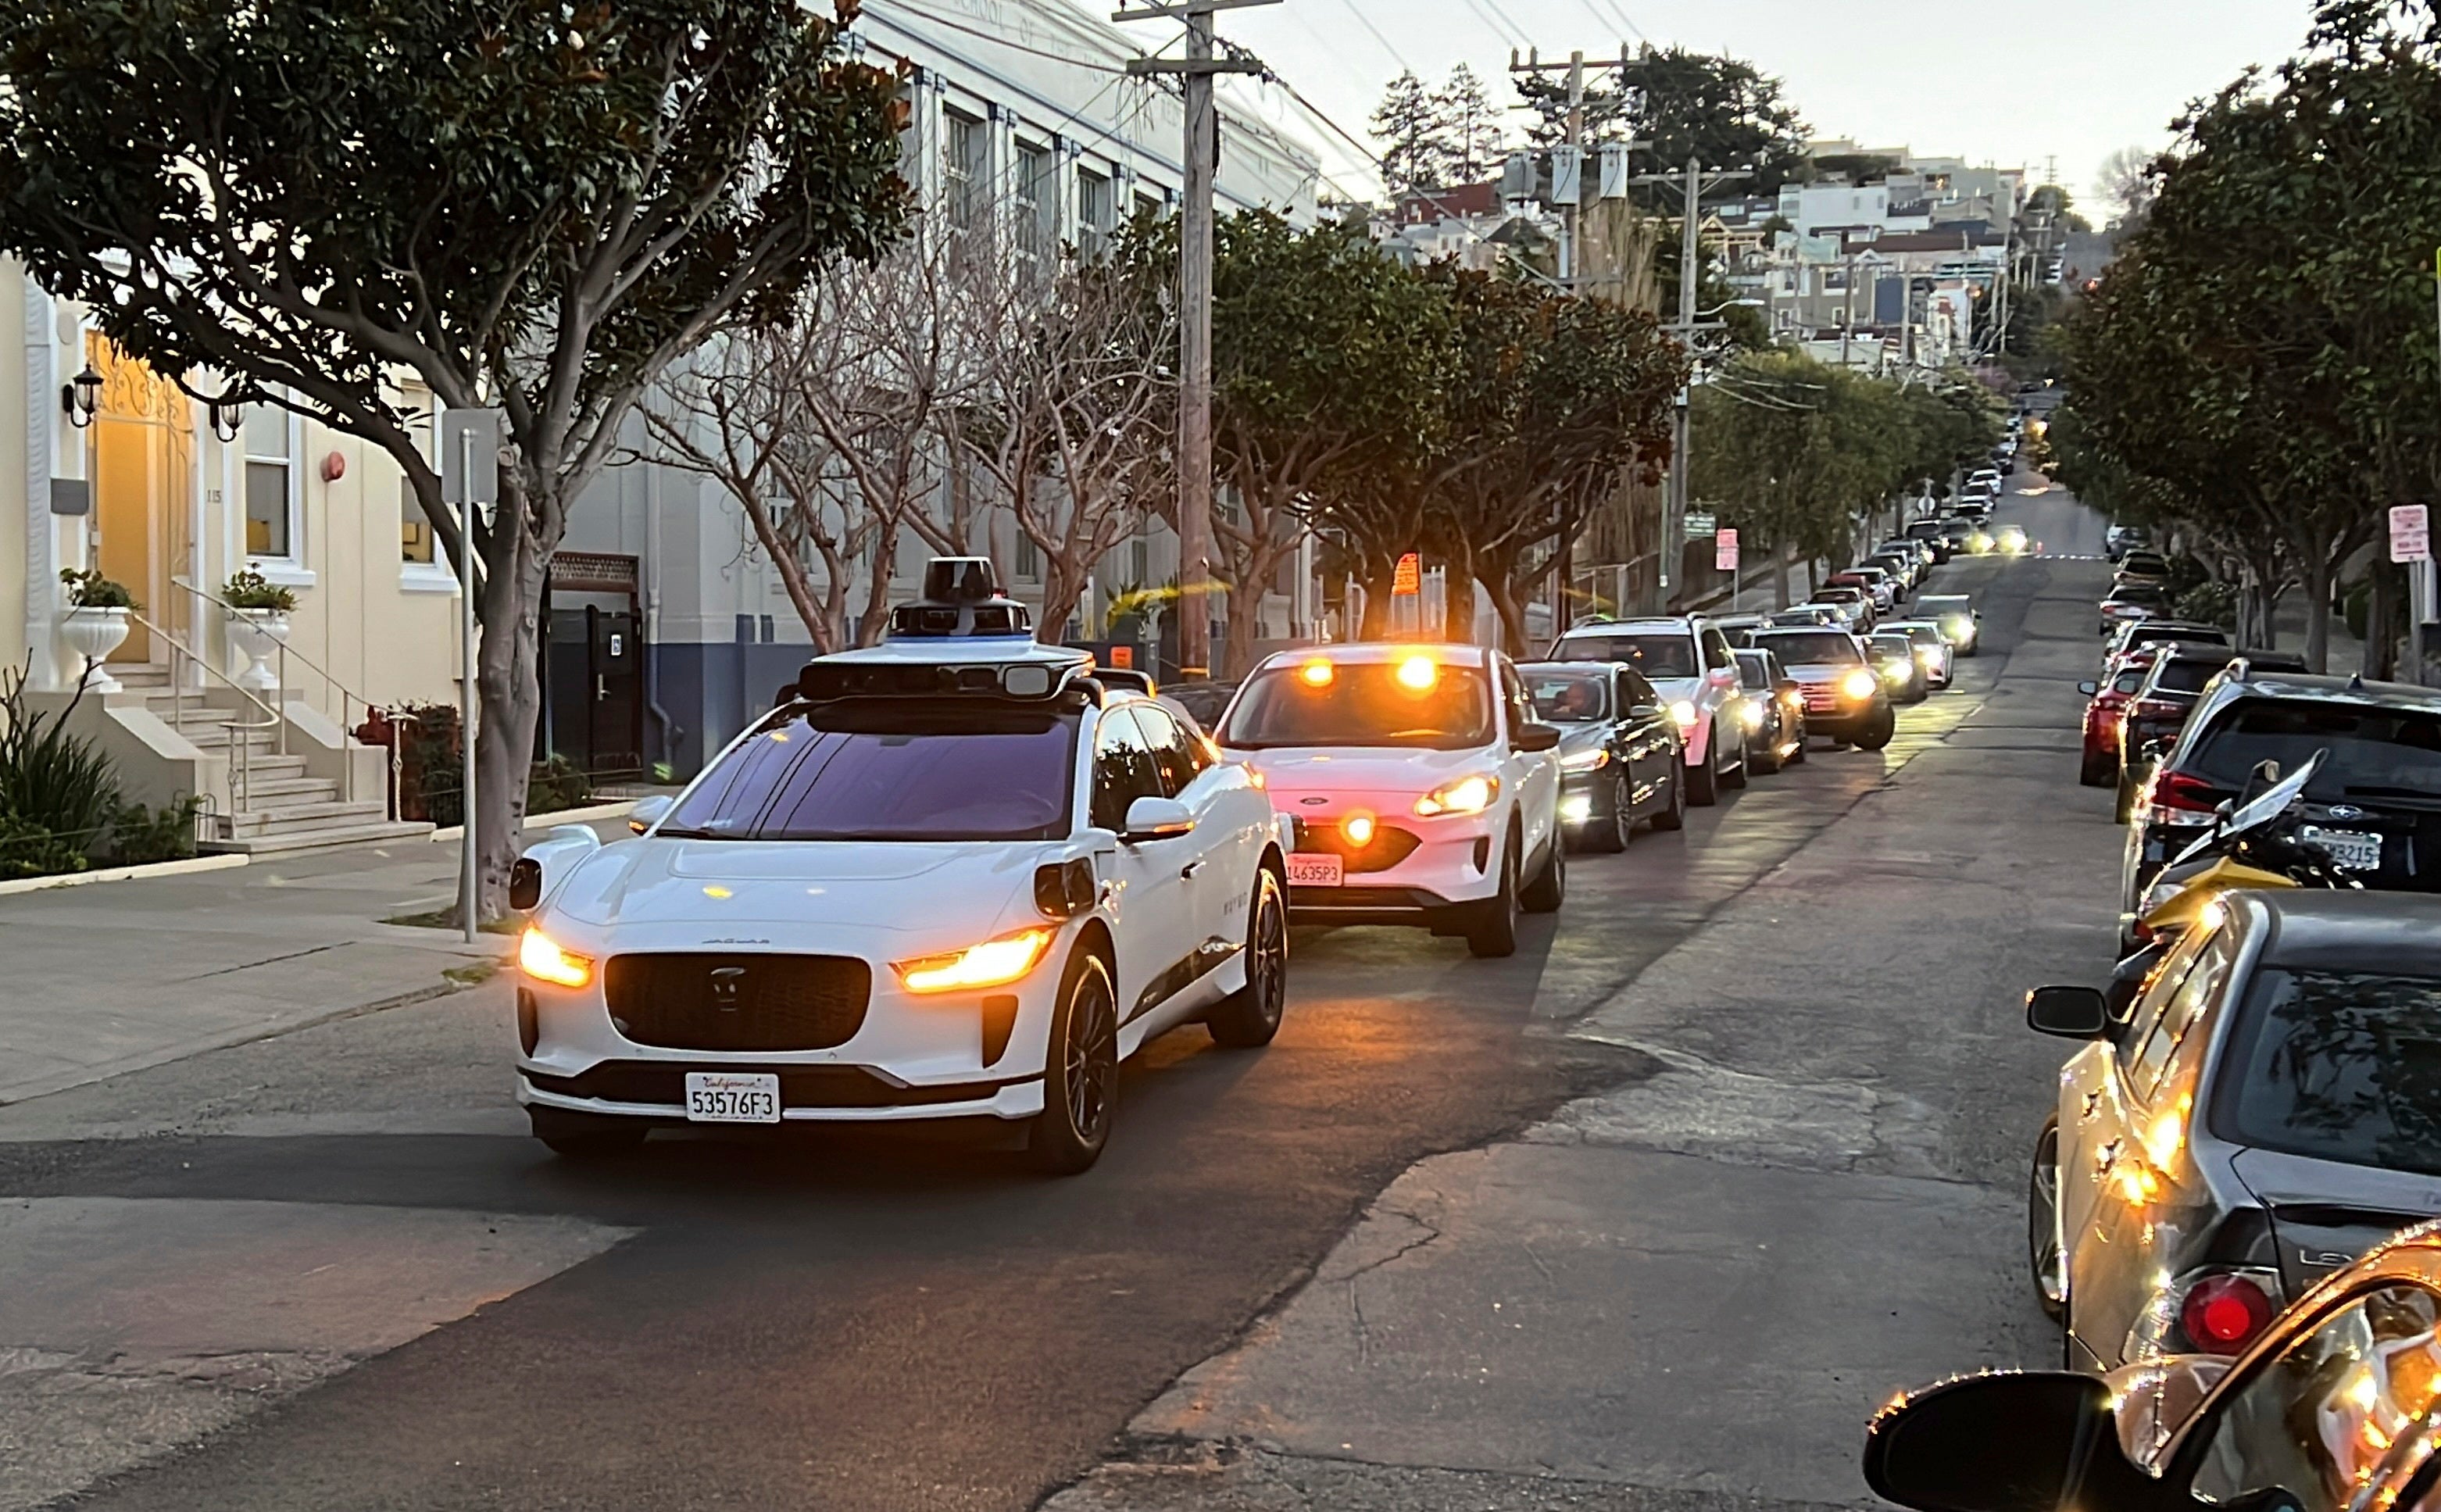 Locals accuse driverless cars of stalling traffic